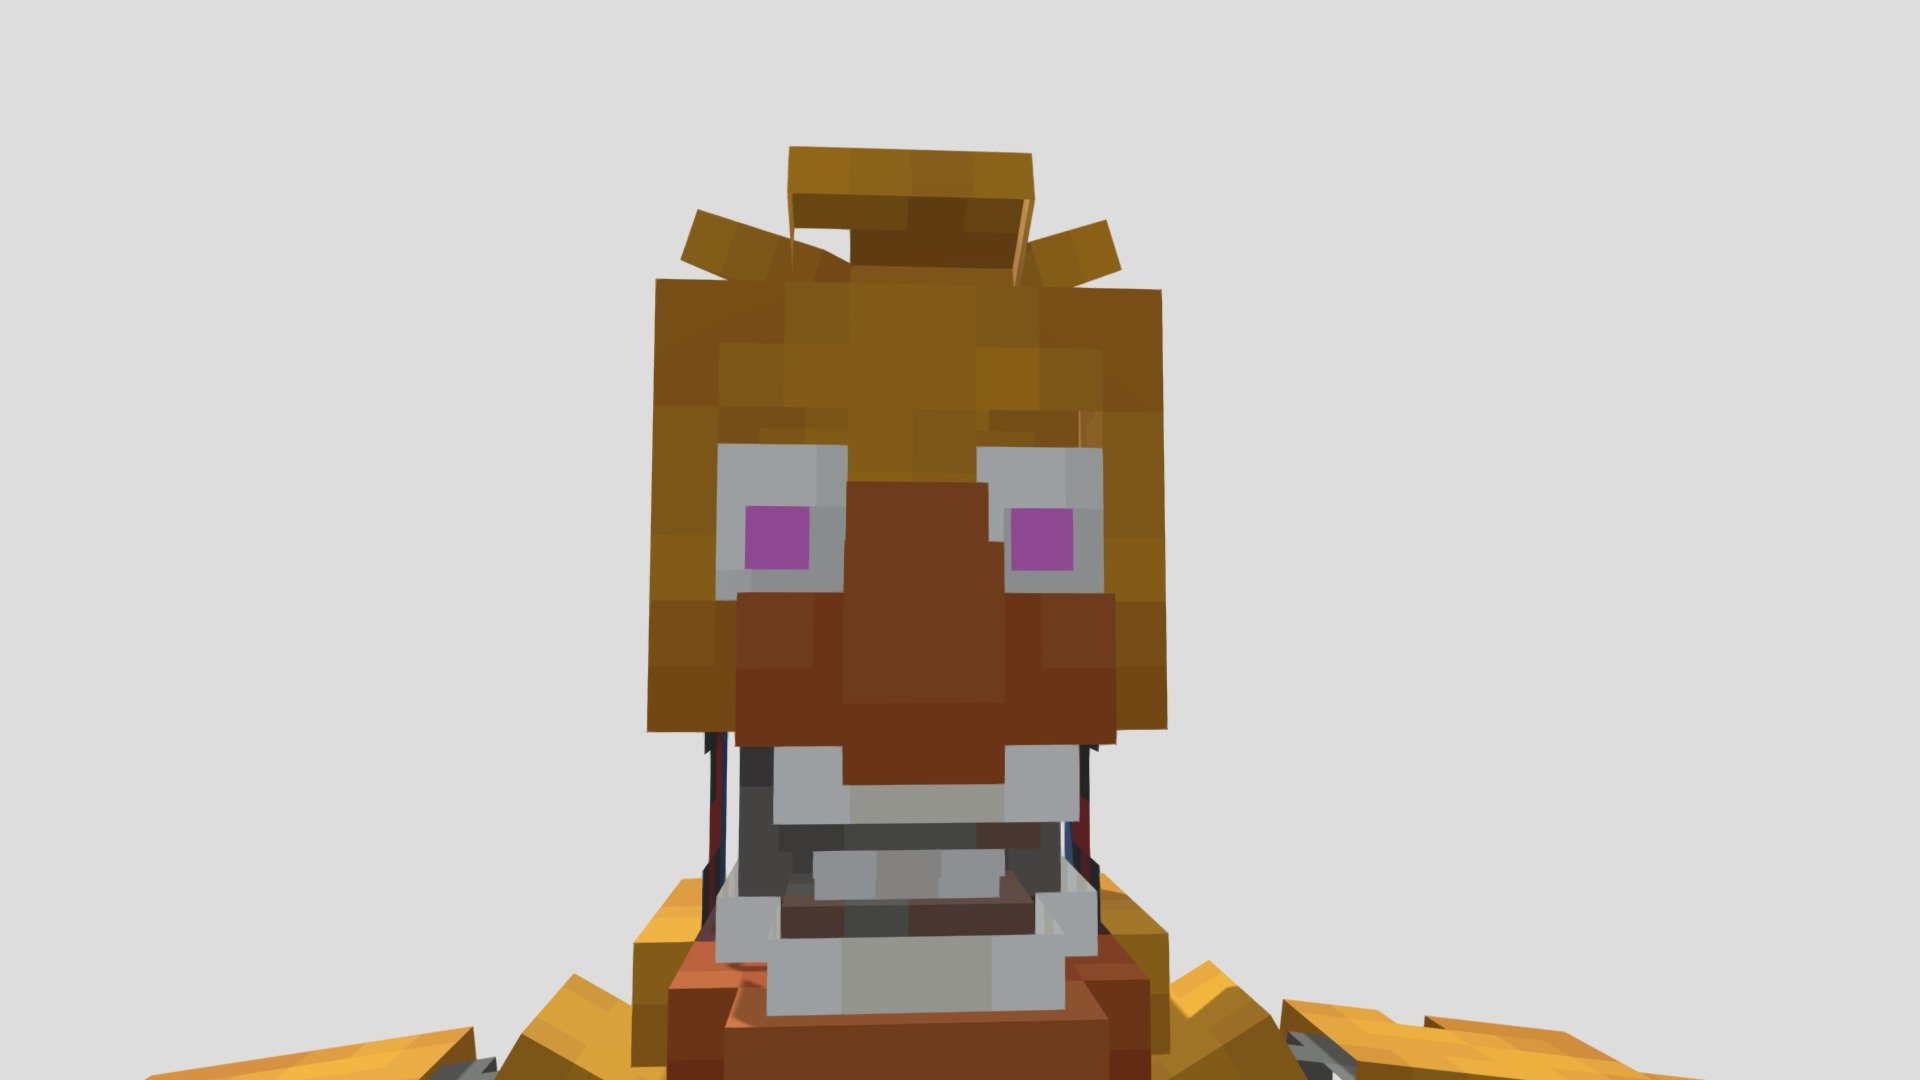 Fnaf 2 Withered Chica Minecraft Skin